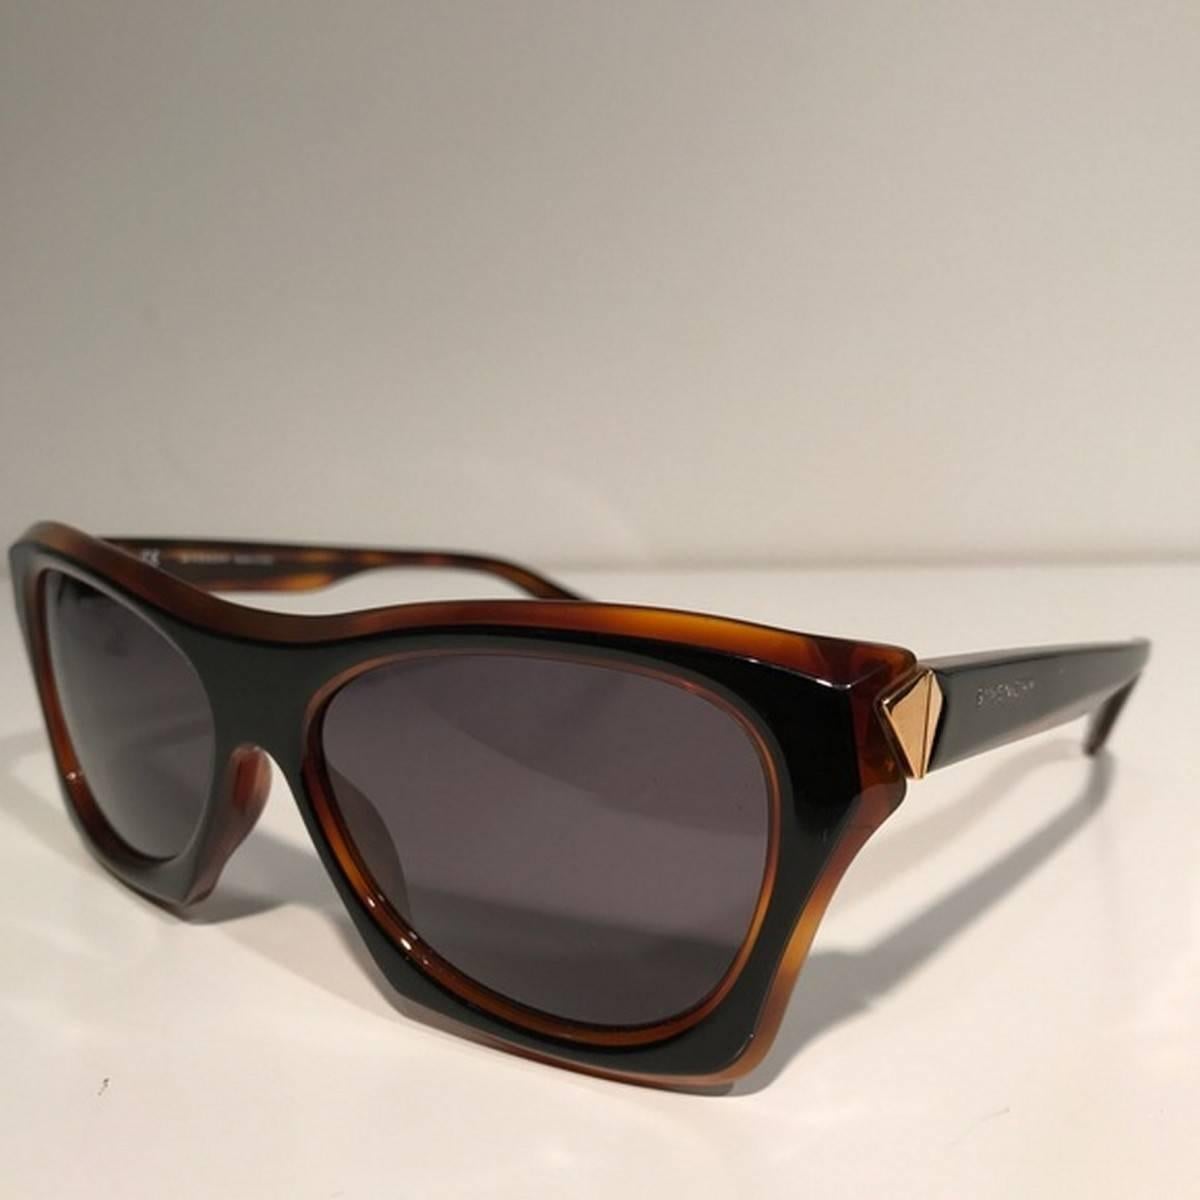 Givenchy Brown Rectangular Sunglasses
Color: Brown/Gold
Size: OS

Brand new with box.
Unused condition.
No flaws.
Made in Italy.